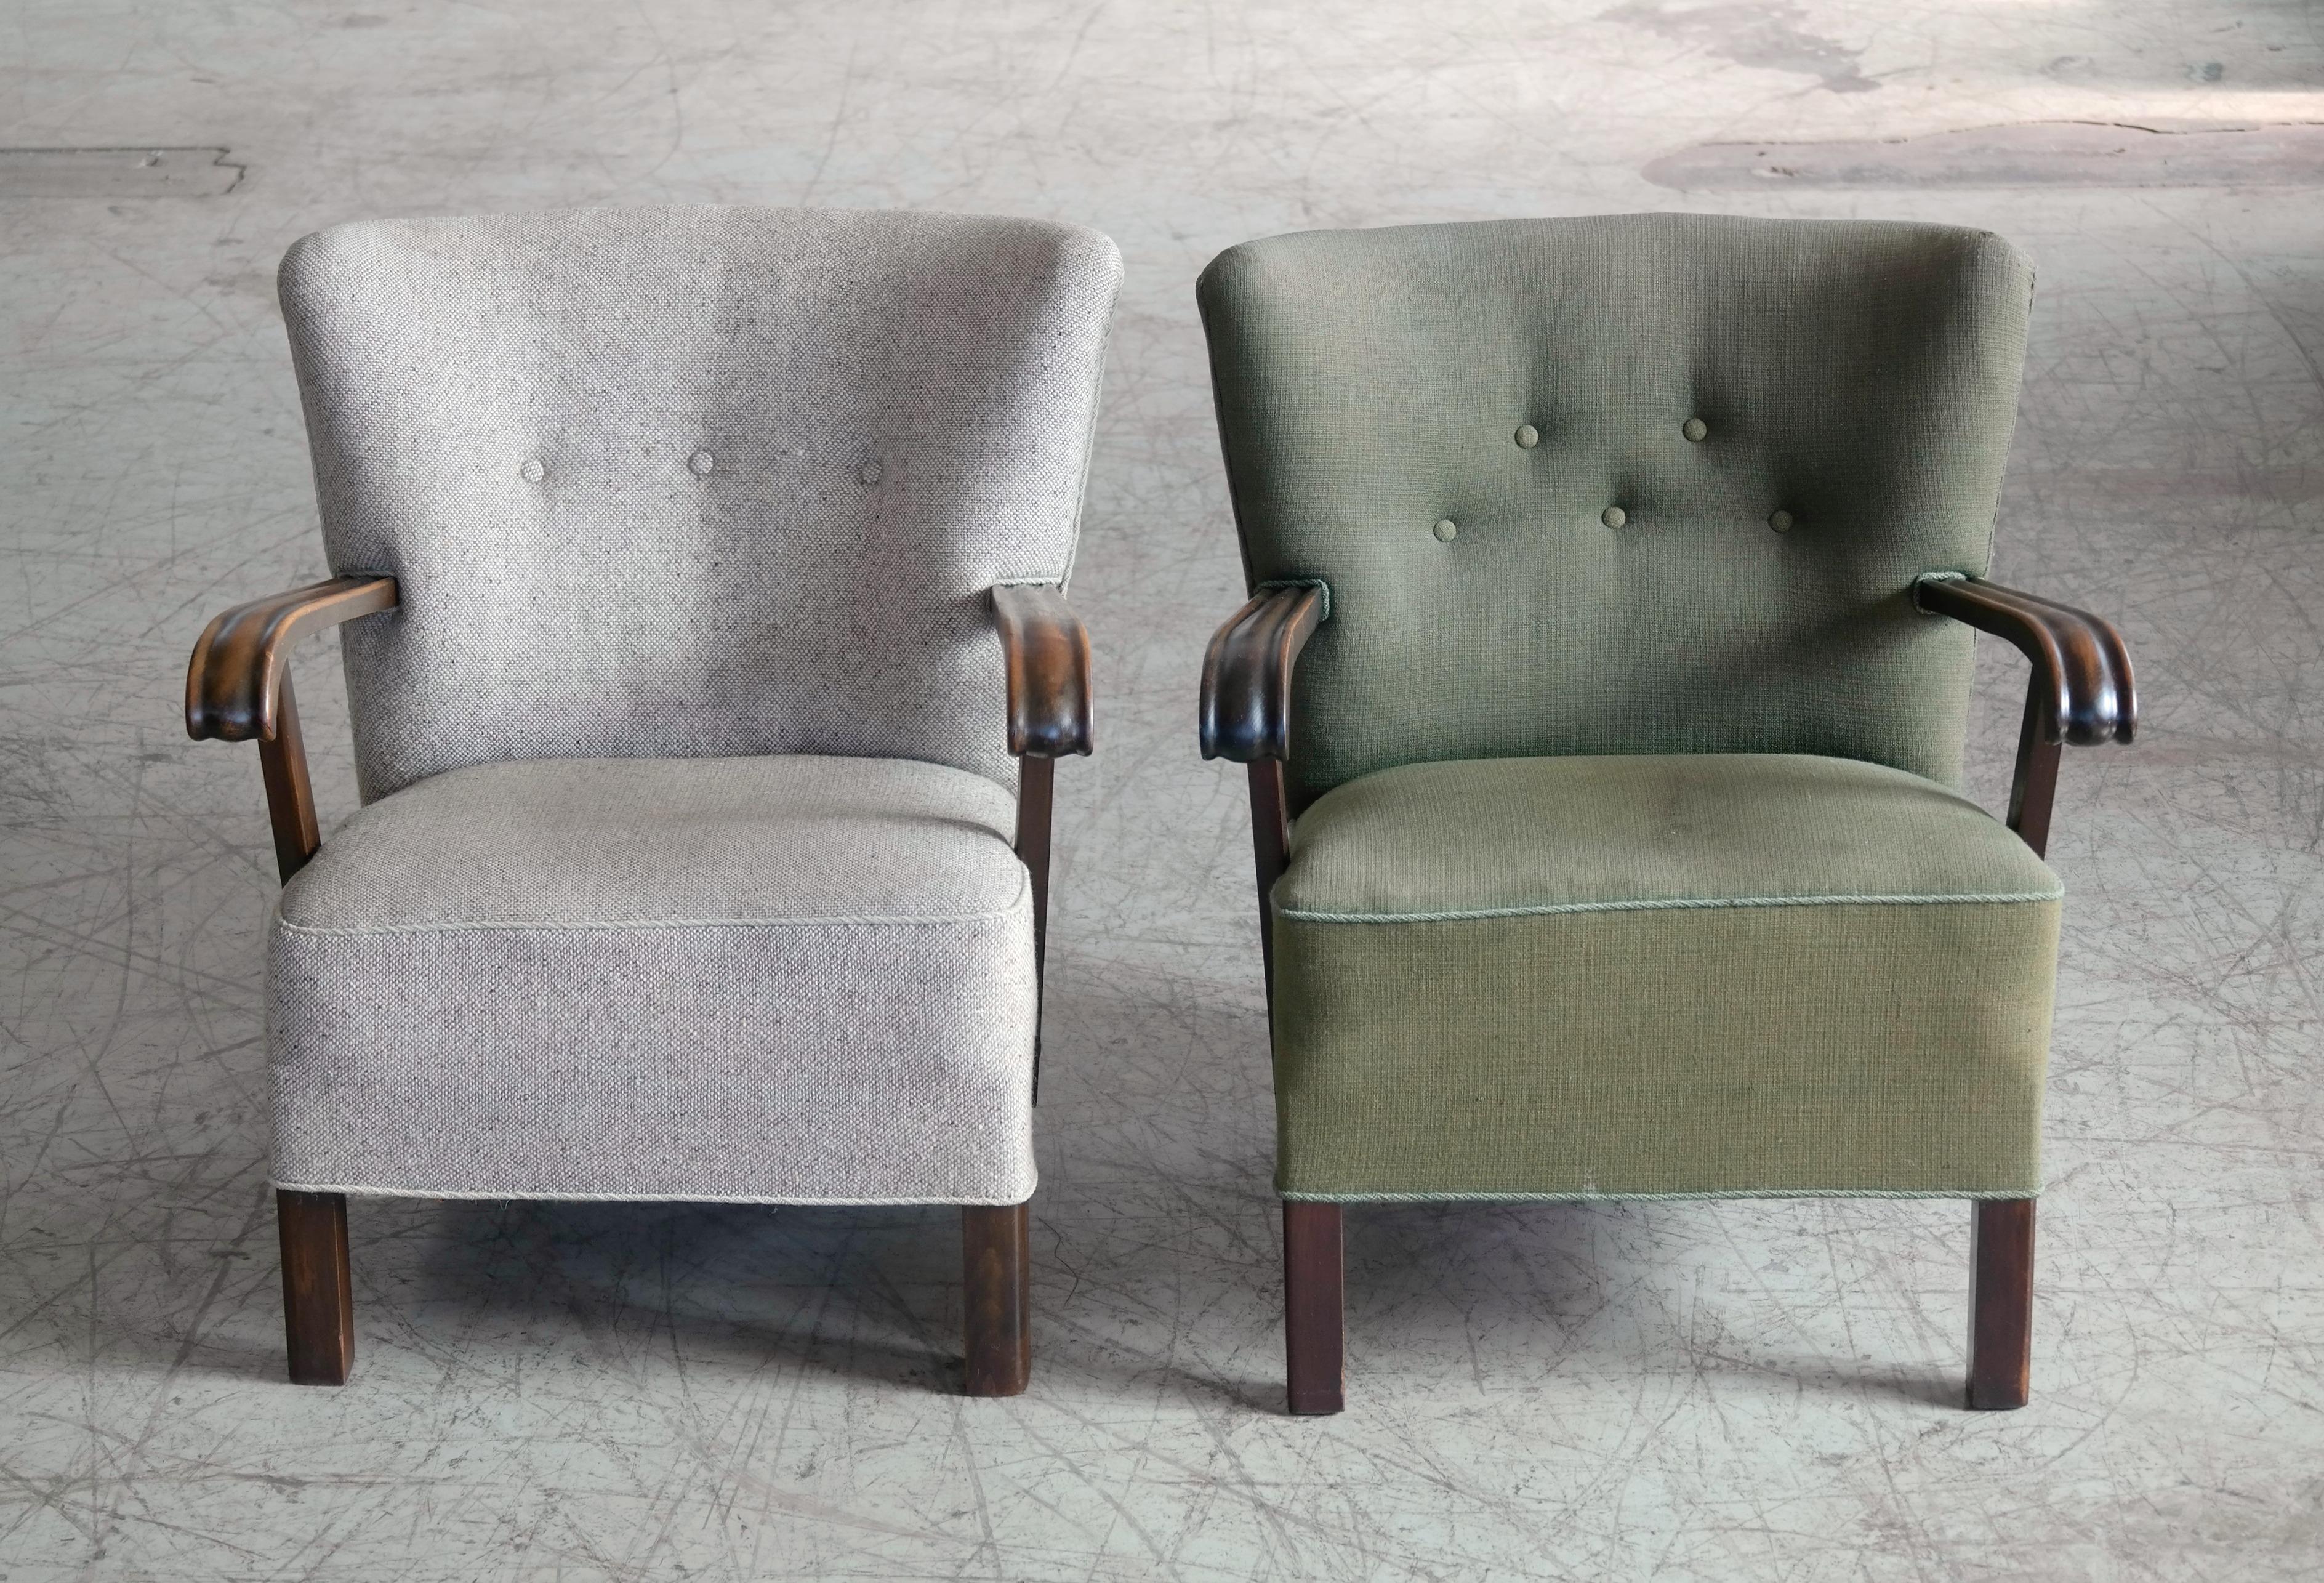 Pair of elegant nice smaller size easy chairs from the late 1940s-1950 very typical of Fritz Hansen's design style both in terms of legs and armrests leading many dealers in Denmark to believe the chairs are indeed by Fritz Hansen. But nobody knows